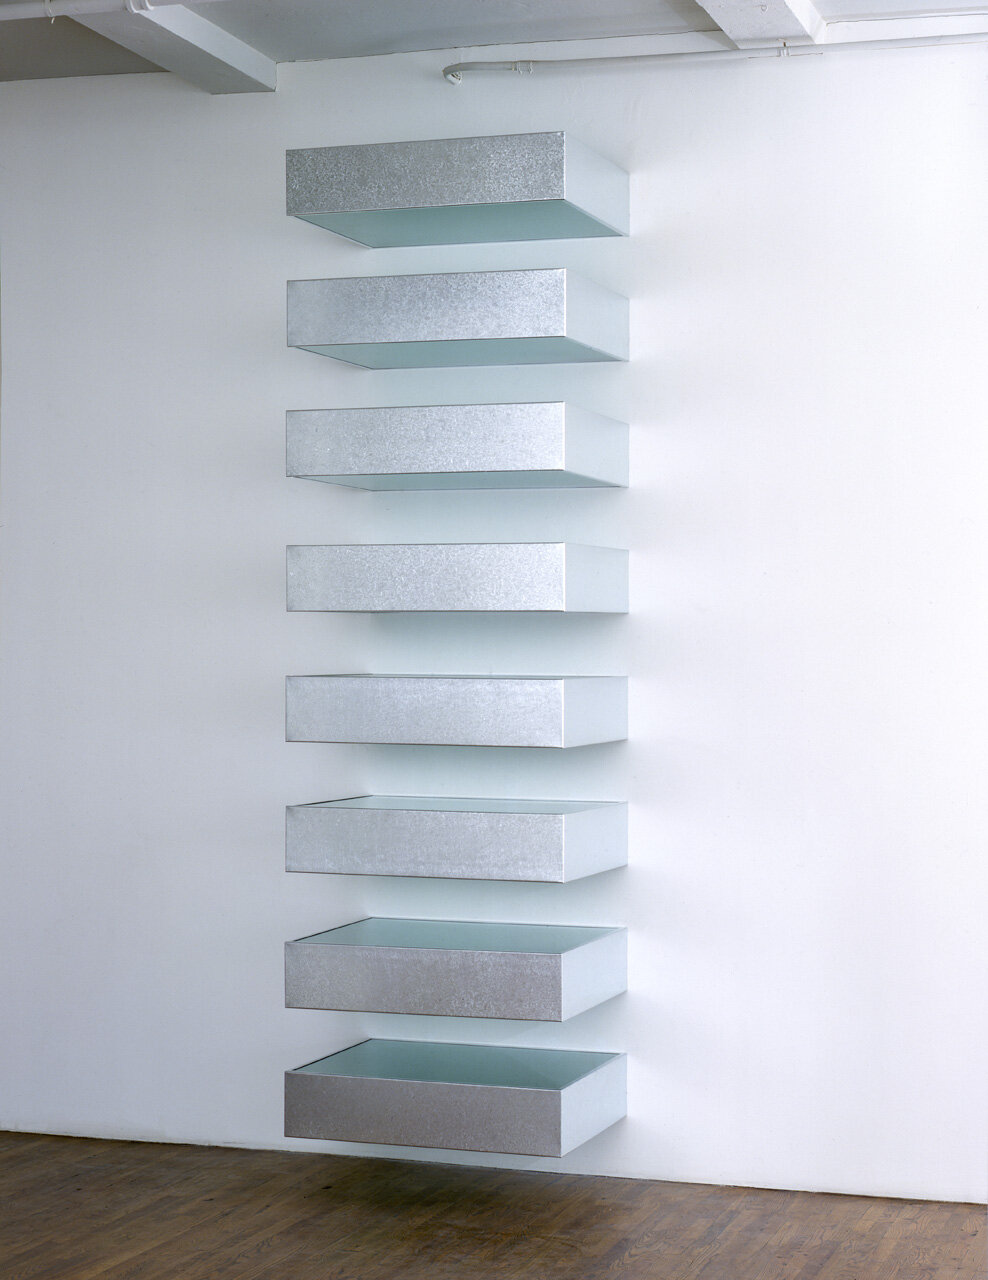  Donald Judd , u ntitled, 1987, galvanized iron, green acrylic sheets, 10 units, each: 9 x 40 x 41 in.; overall: 171 x 40 x 41 in.; installation view,  Changing Group Exhibition , Paula Cooper Gallery, New York, January 20 – January 30, 1988. Photo: 